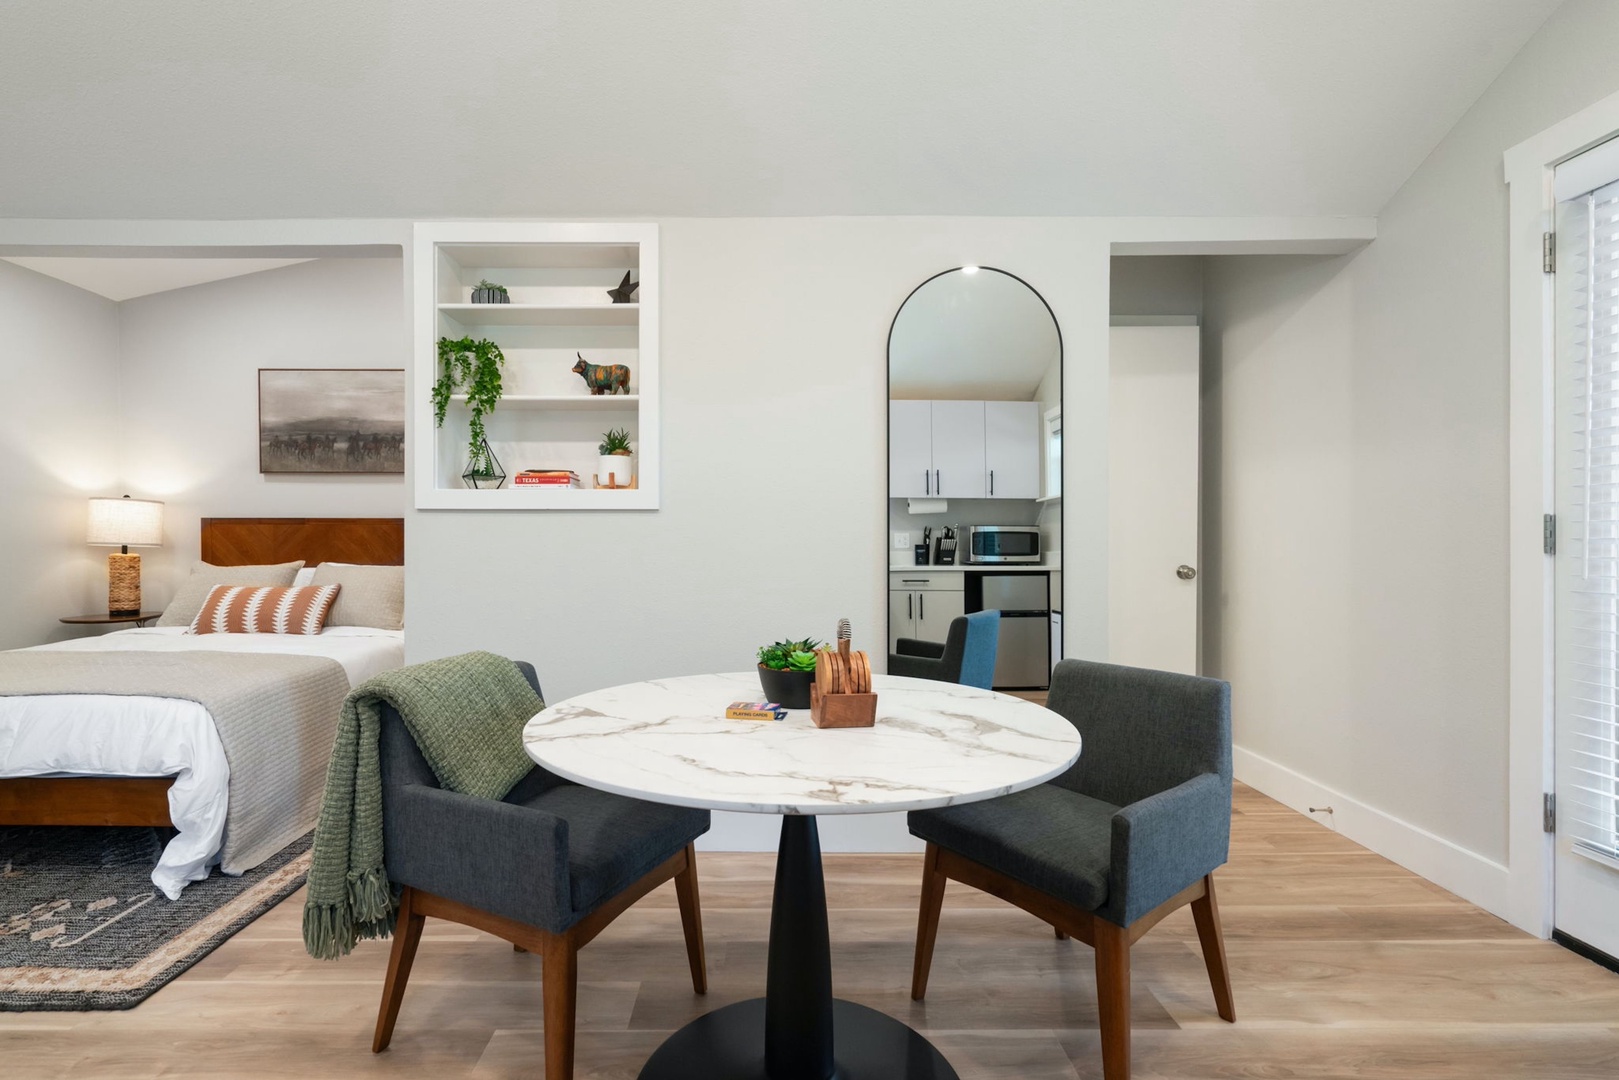 Sip morning coffee or grab a bite at the chic dining table, with seating for 2